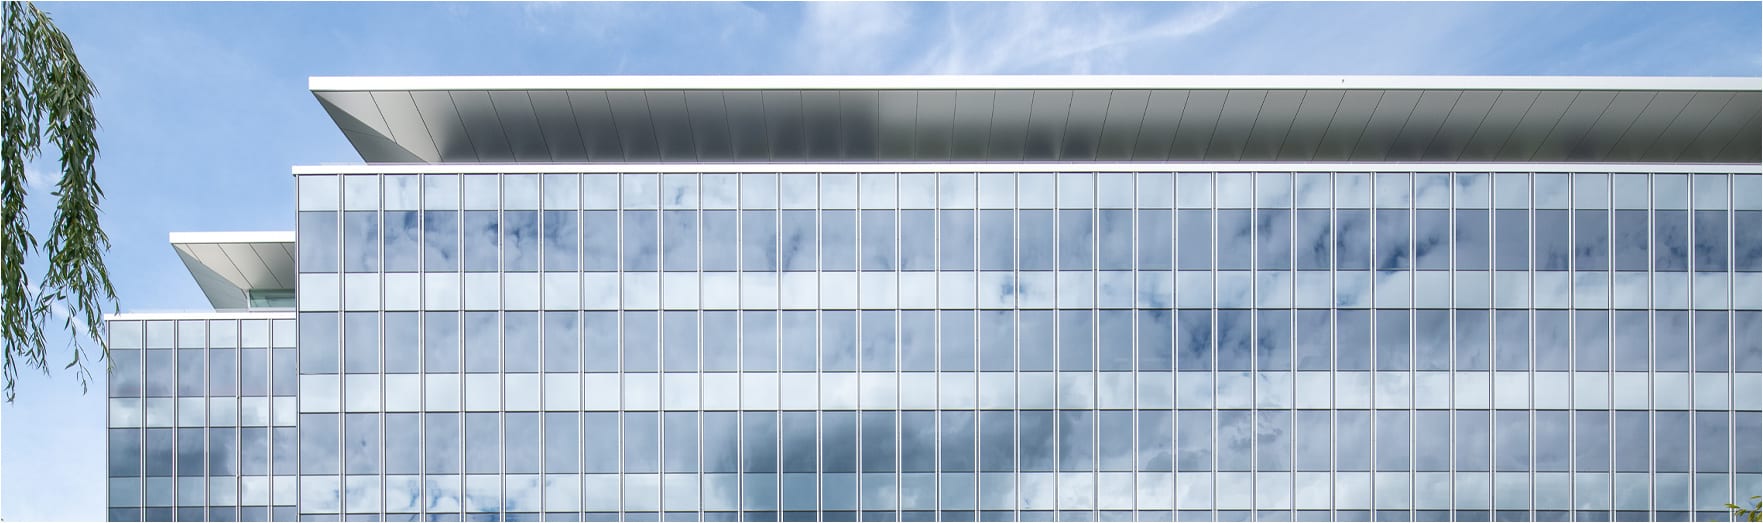 Detail of a post modern building&#x27;s rows of windows reflecting clouds